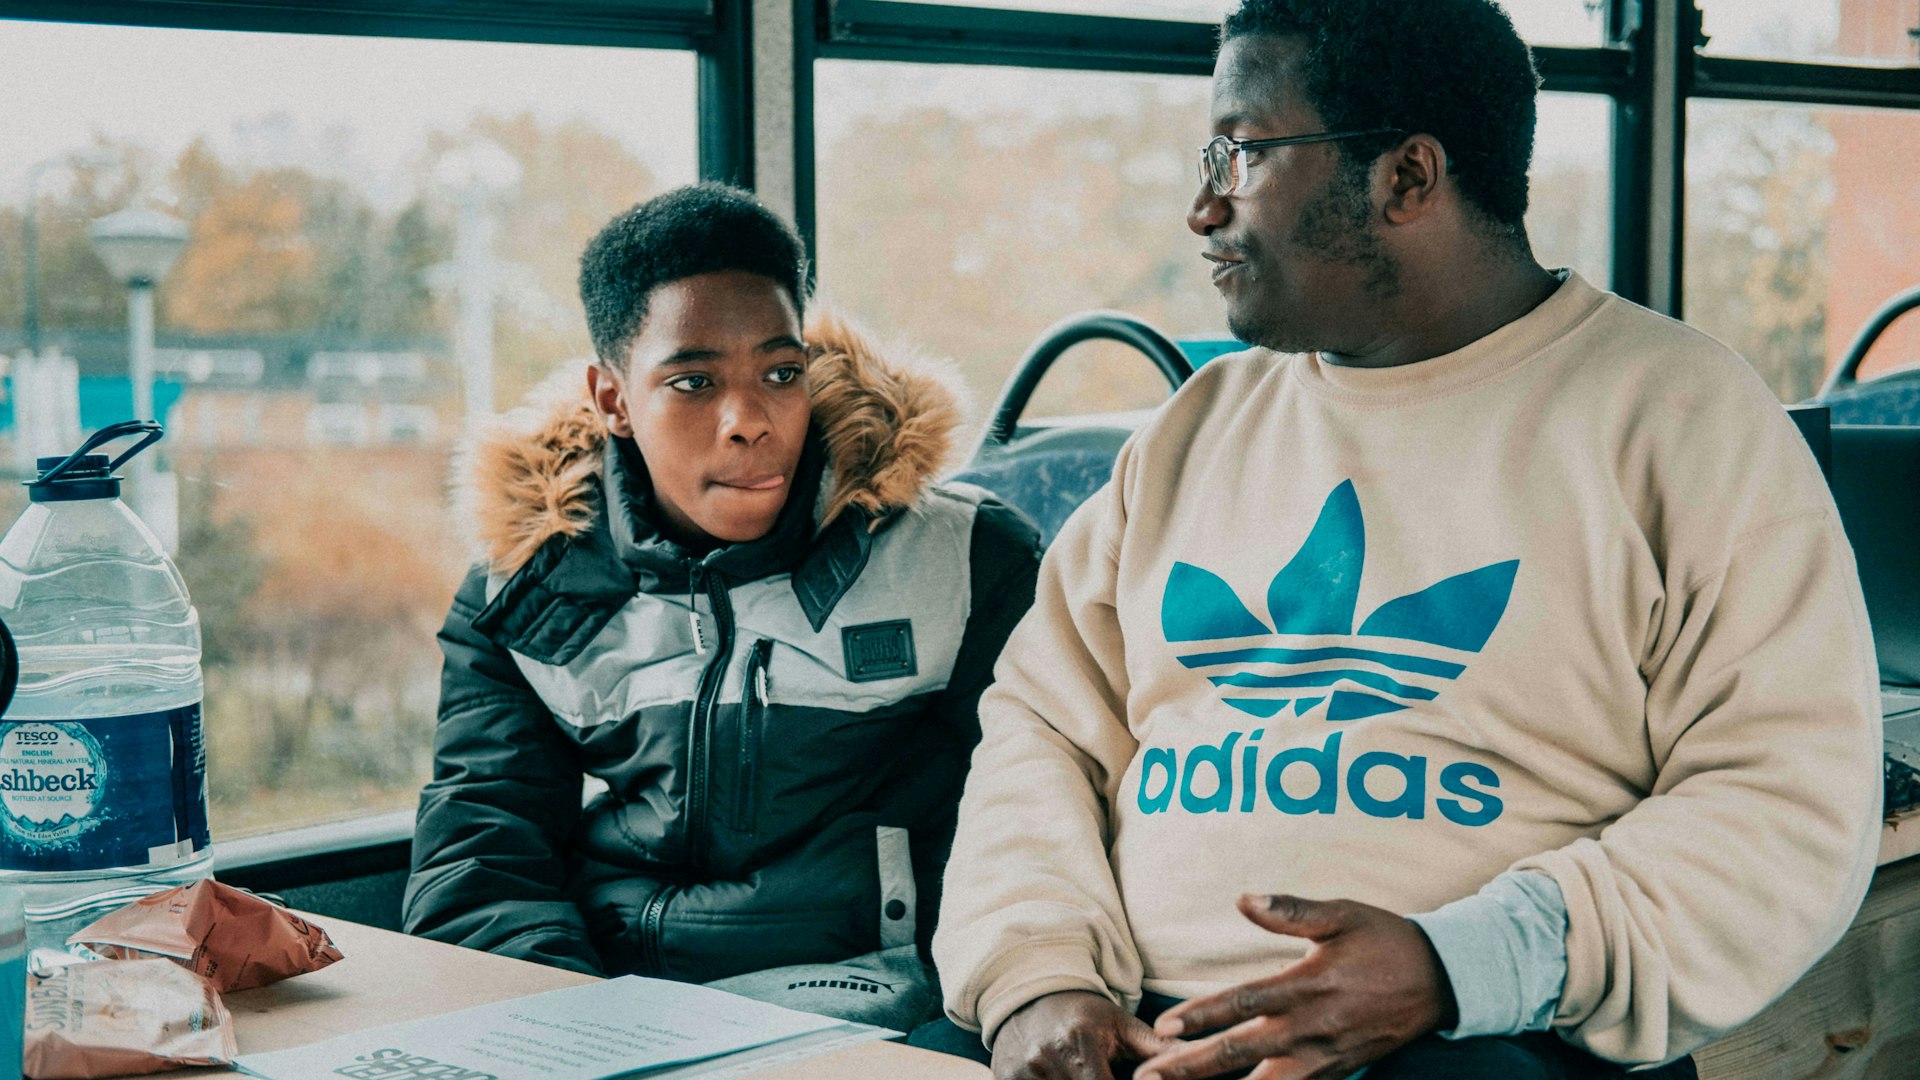 How an old London bus is tackling the city’s gang culture